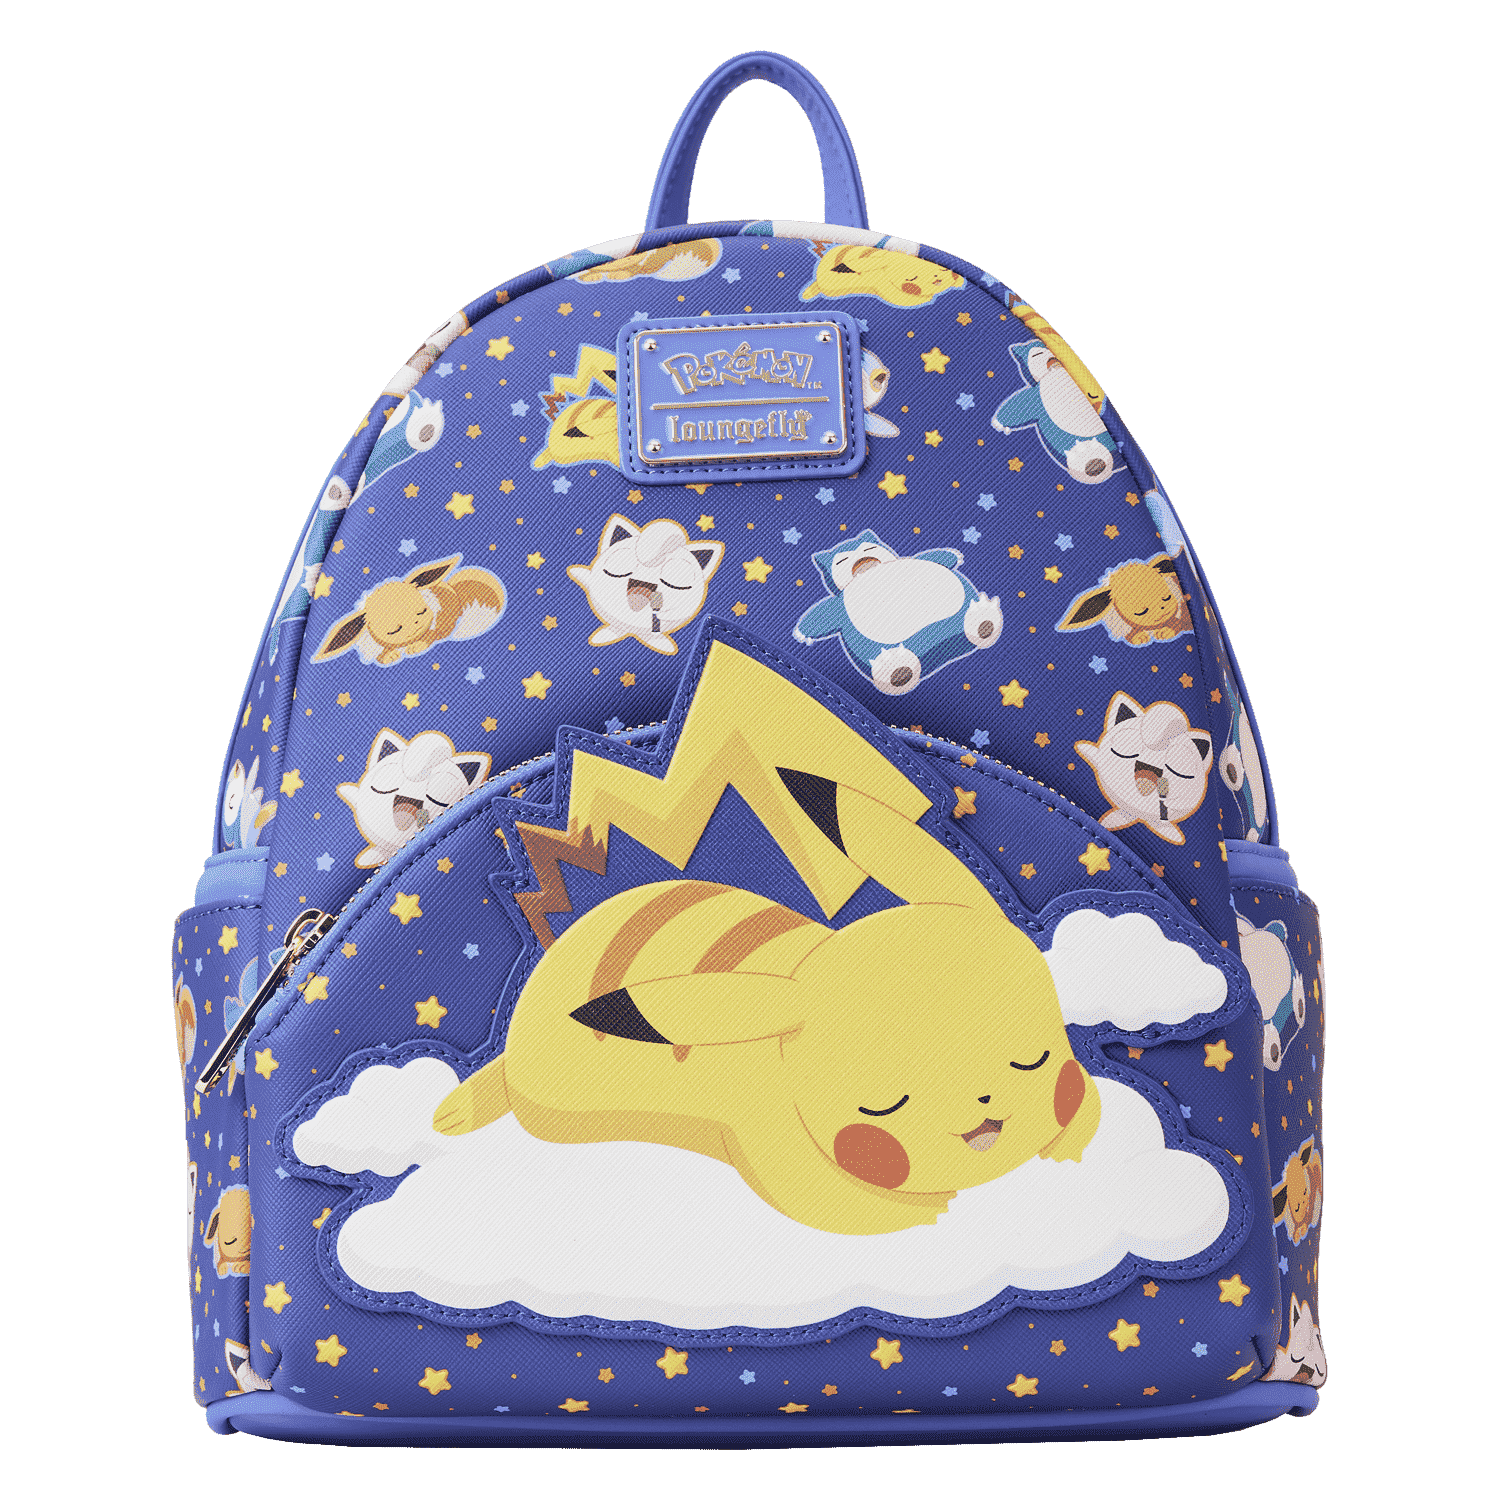 Eevee Sweet Choices Convertible Mini Backpack by Loungefly